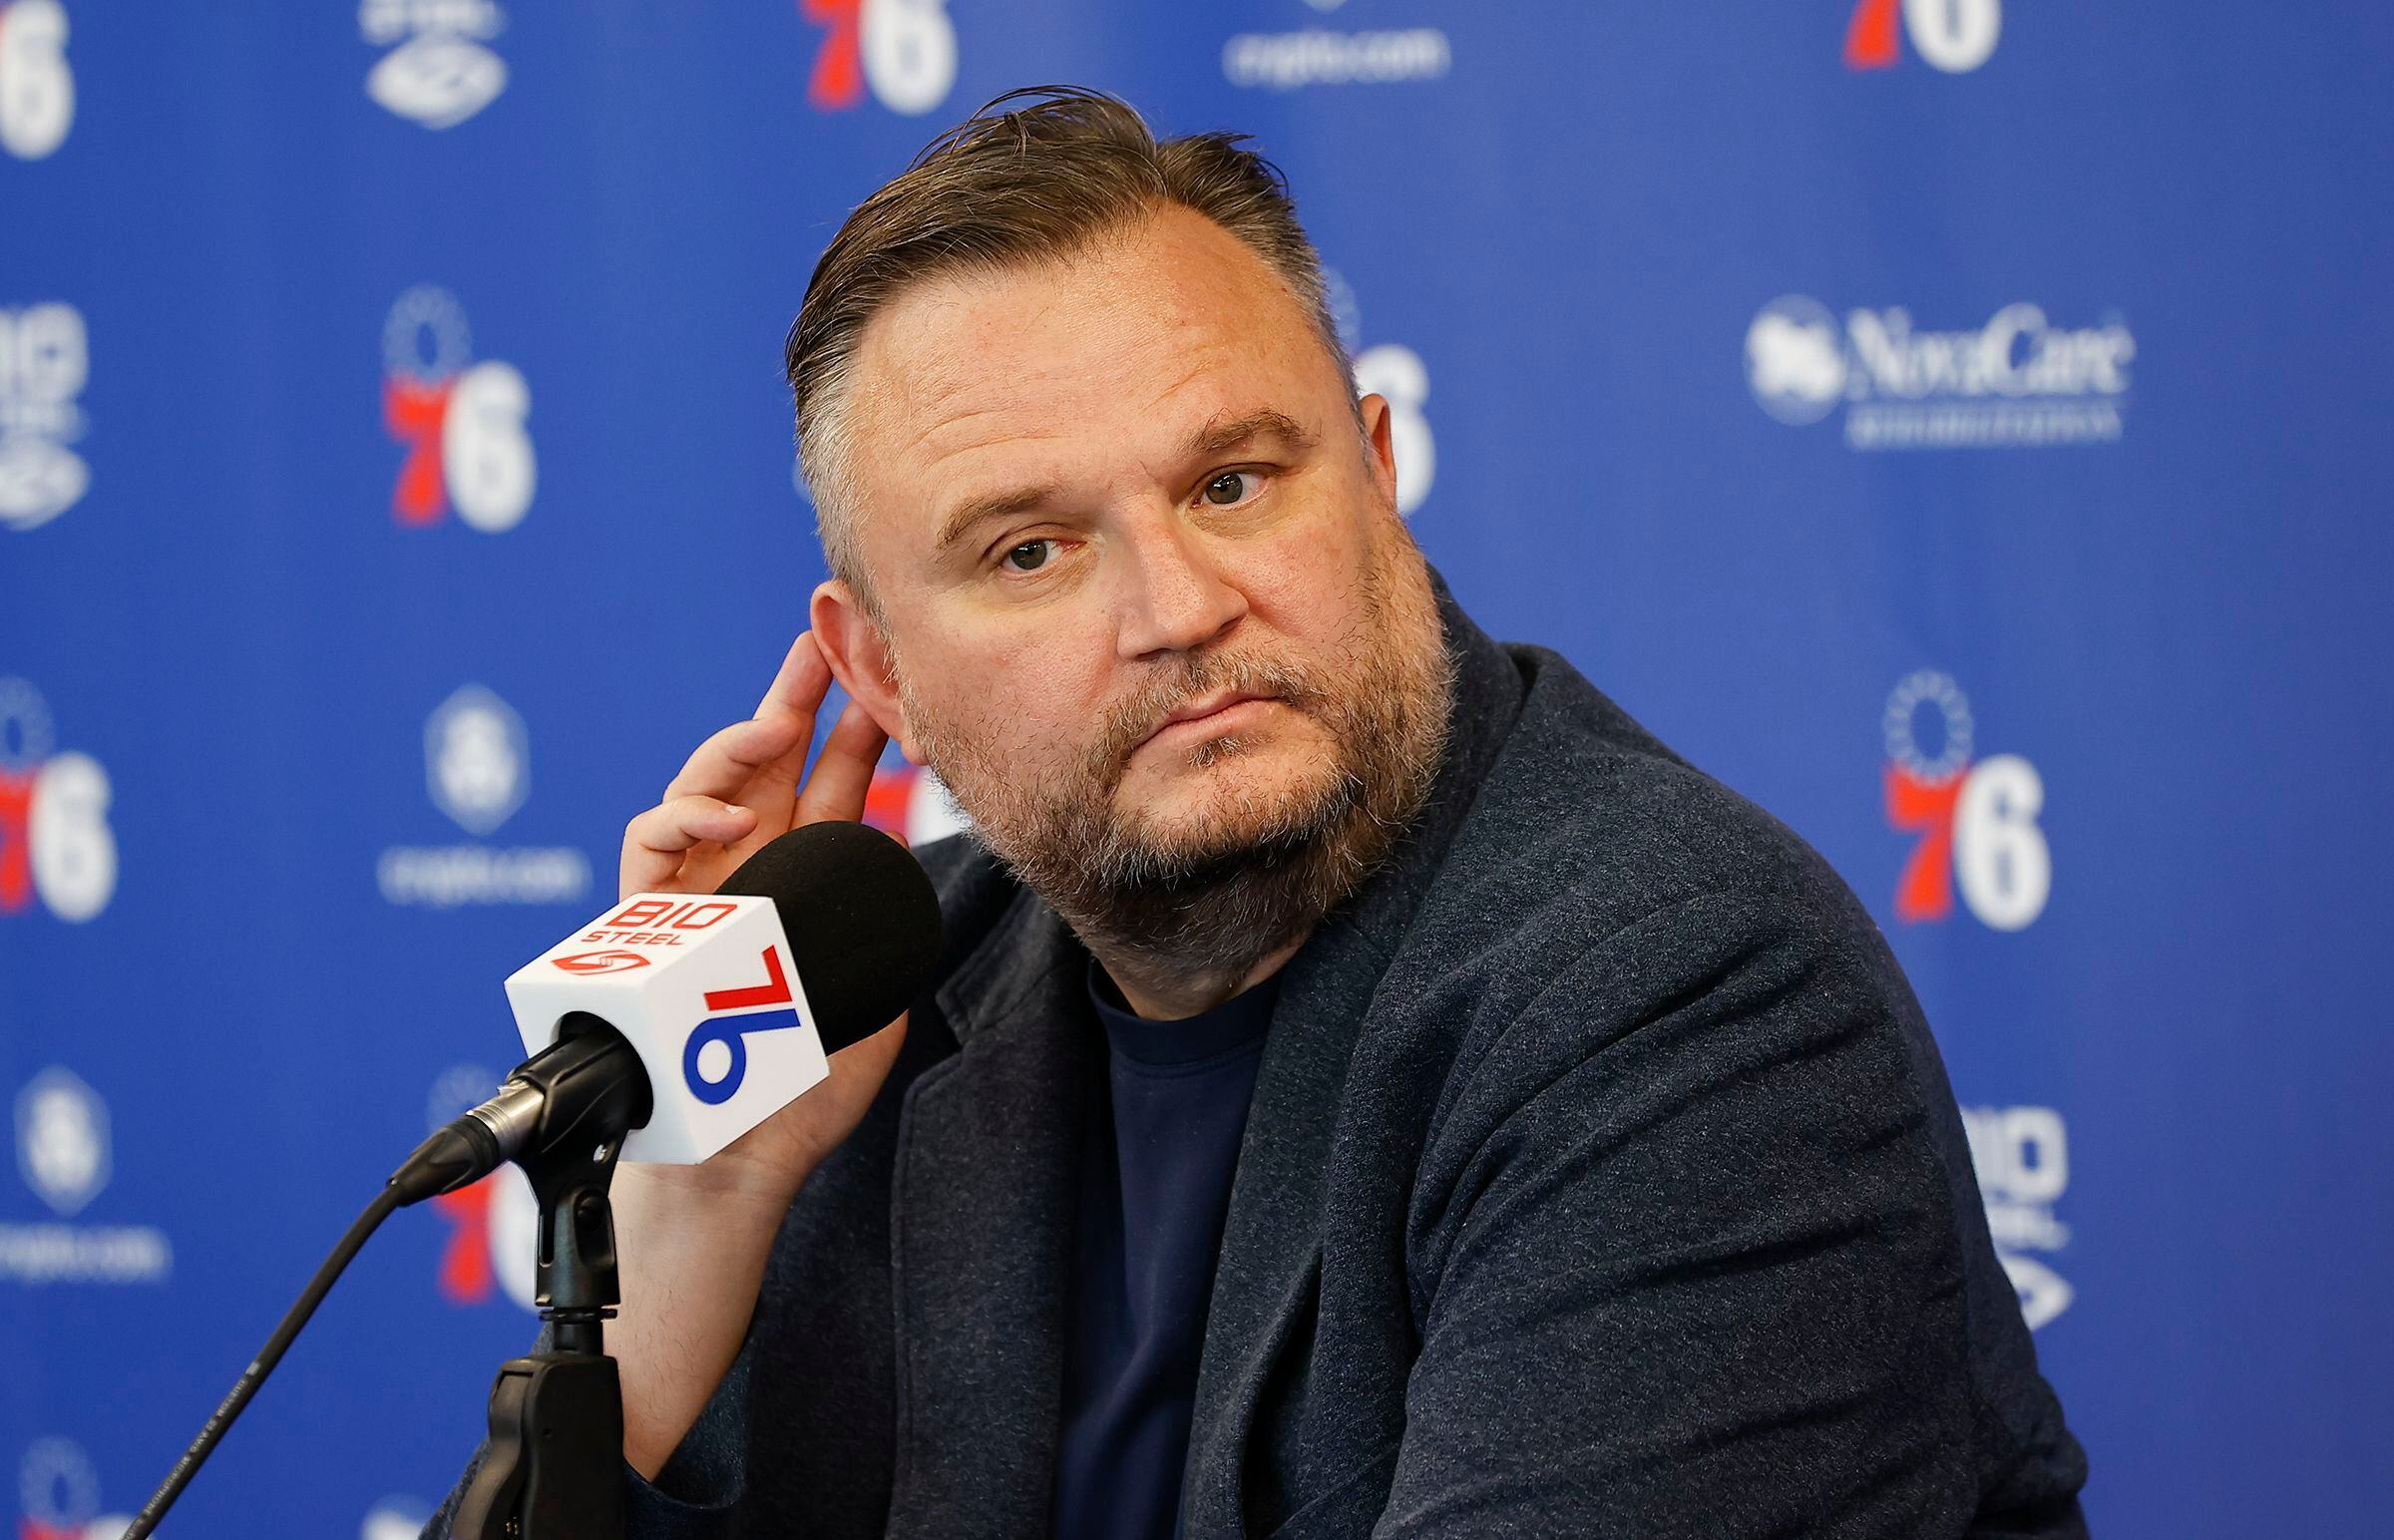 SIXERS CAMP OPENS IN LESS THAN A MONTH — REAL-DEAL TITLE HOPES